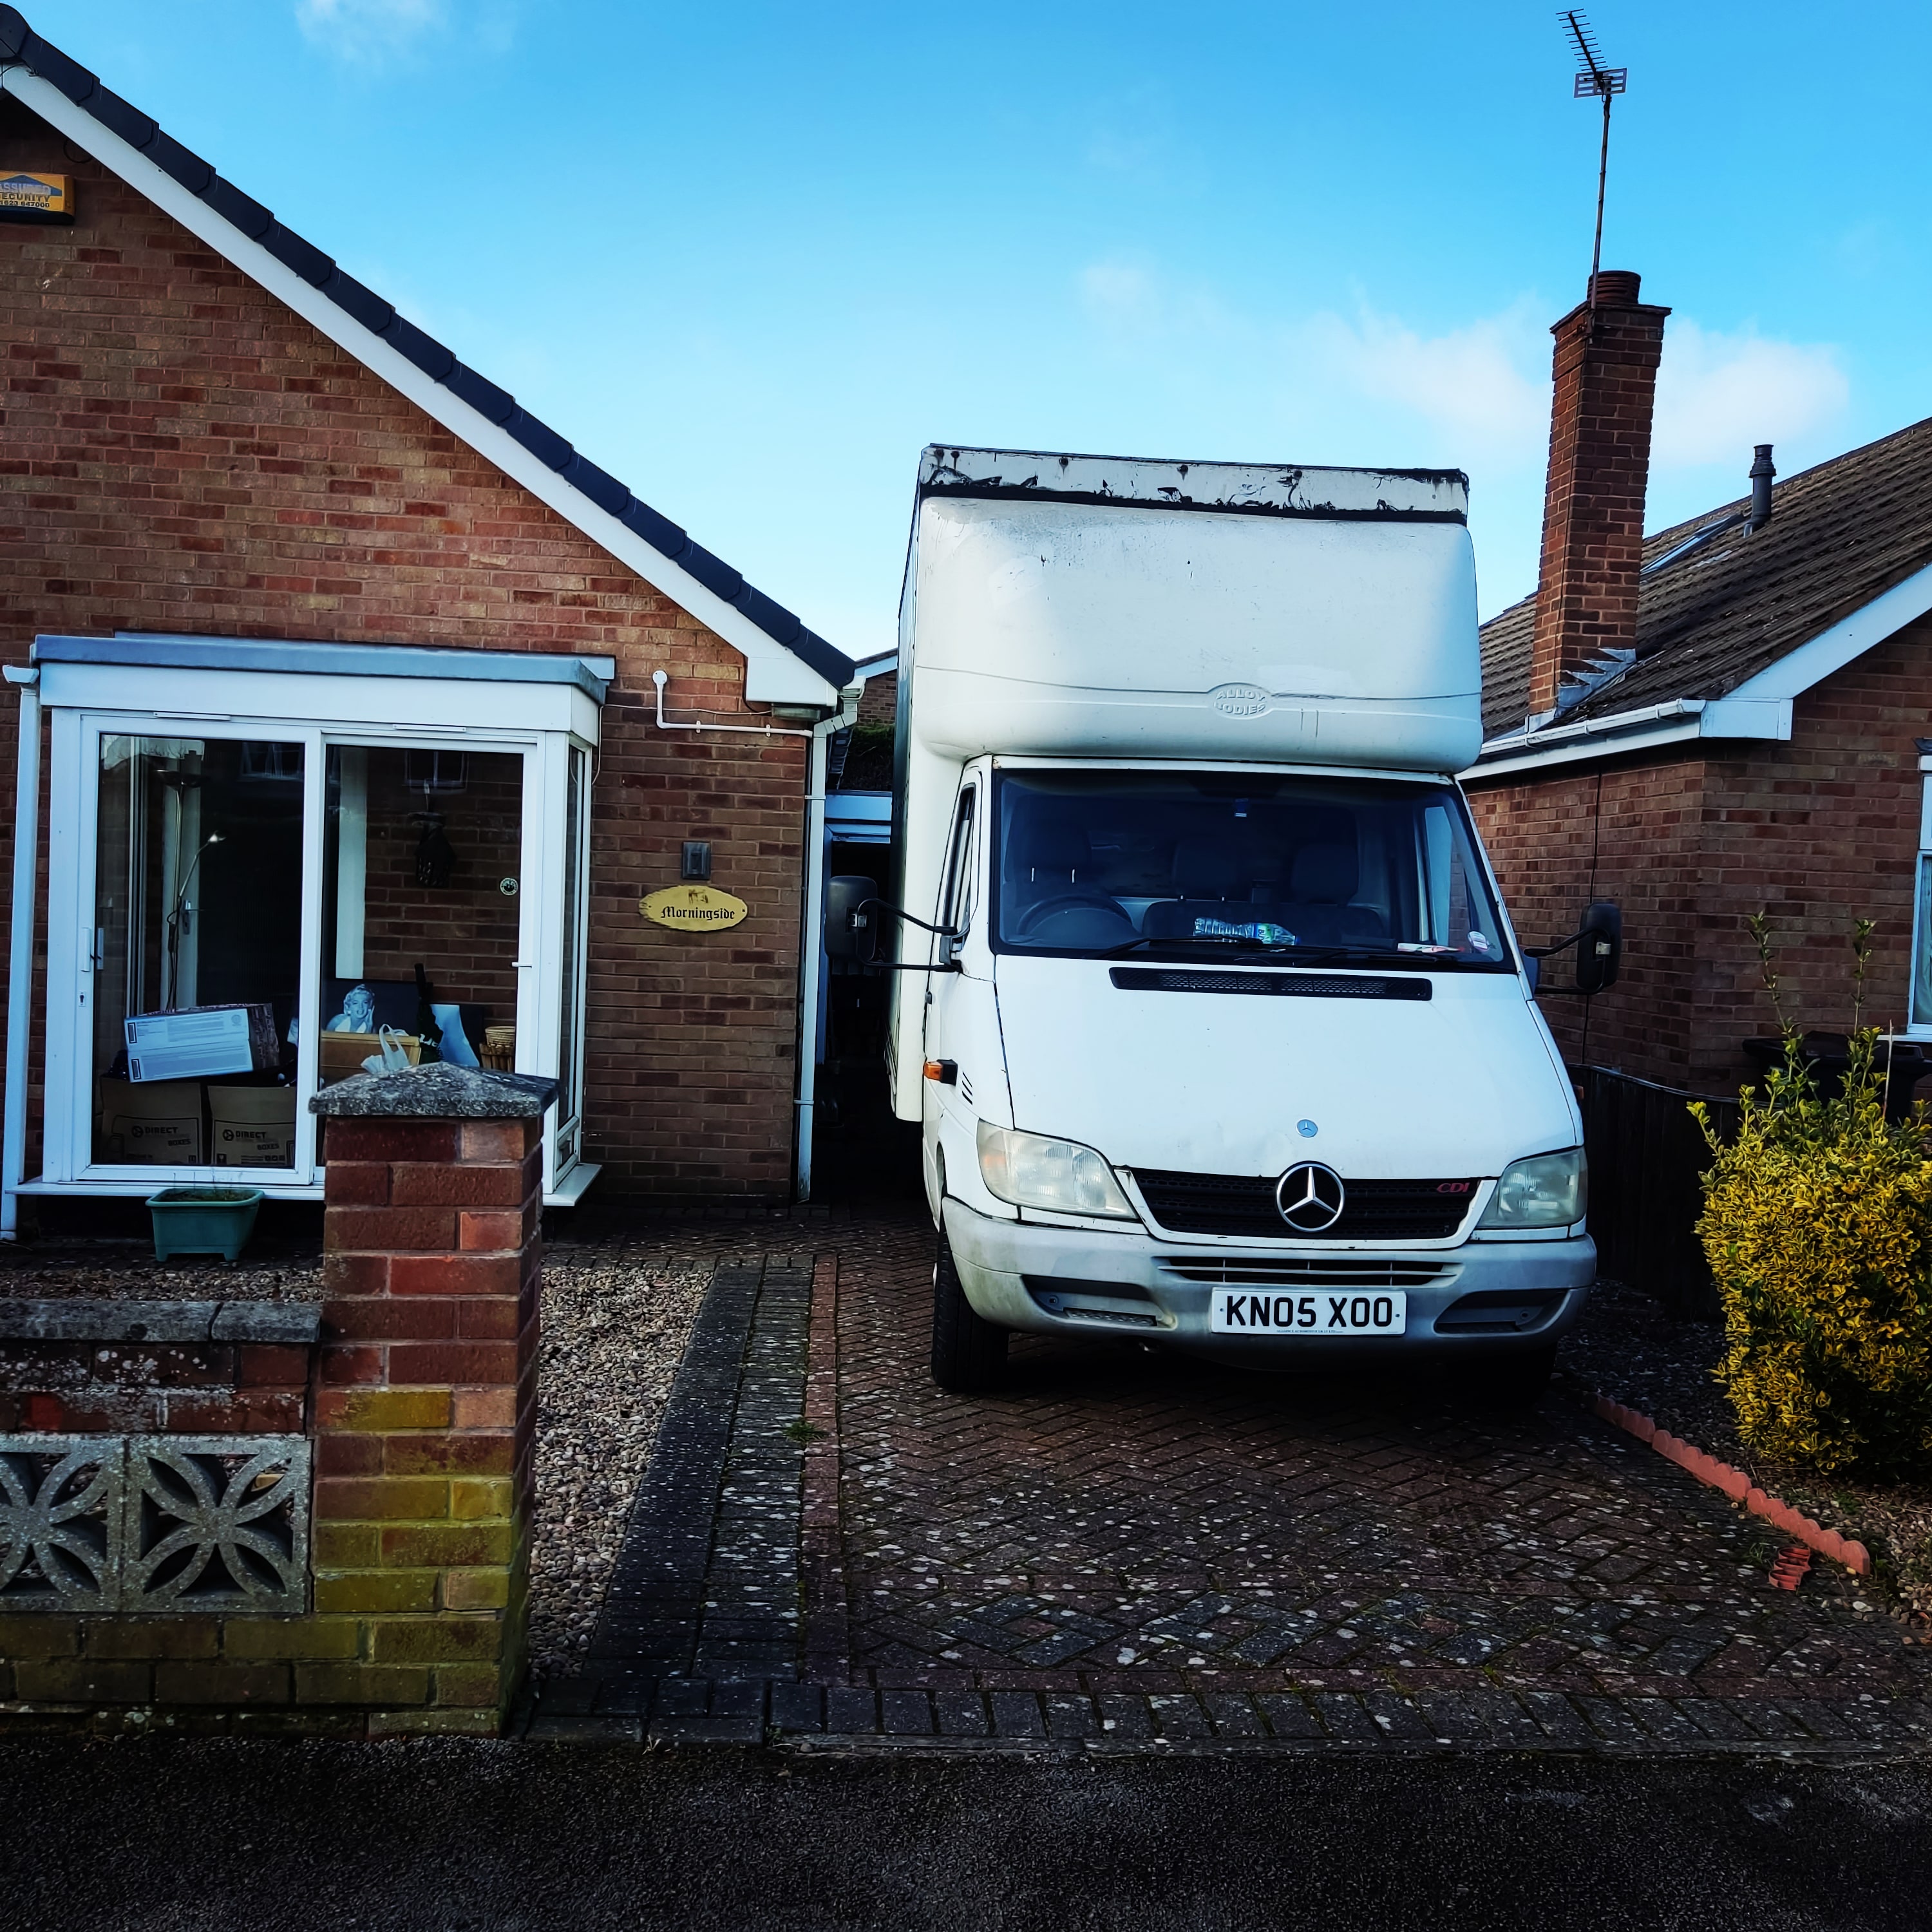 7 Reasons to Use Man and Van Services Over Big Removals and Van Hire Companies